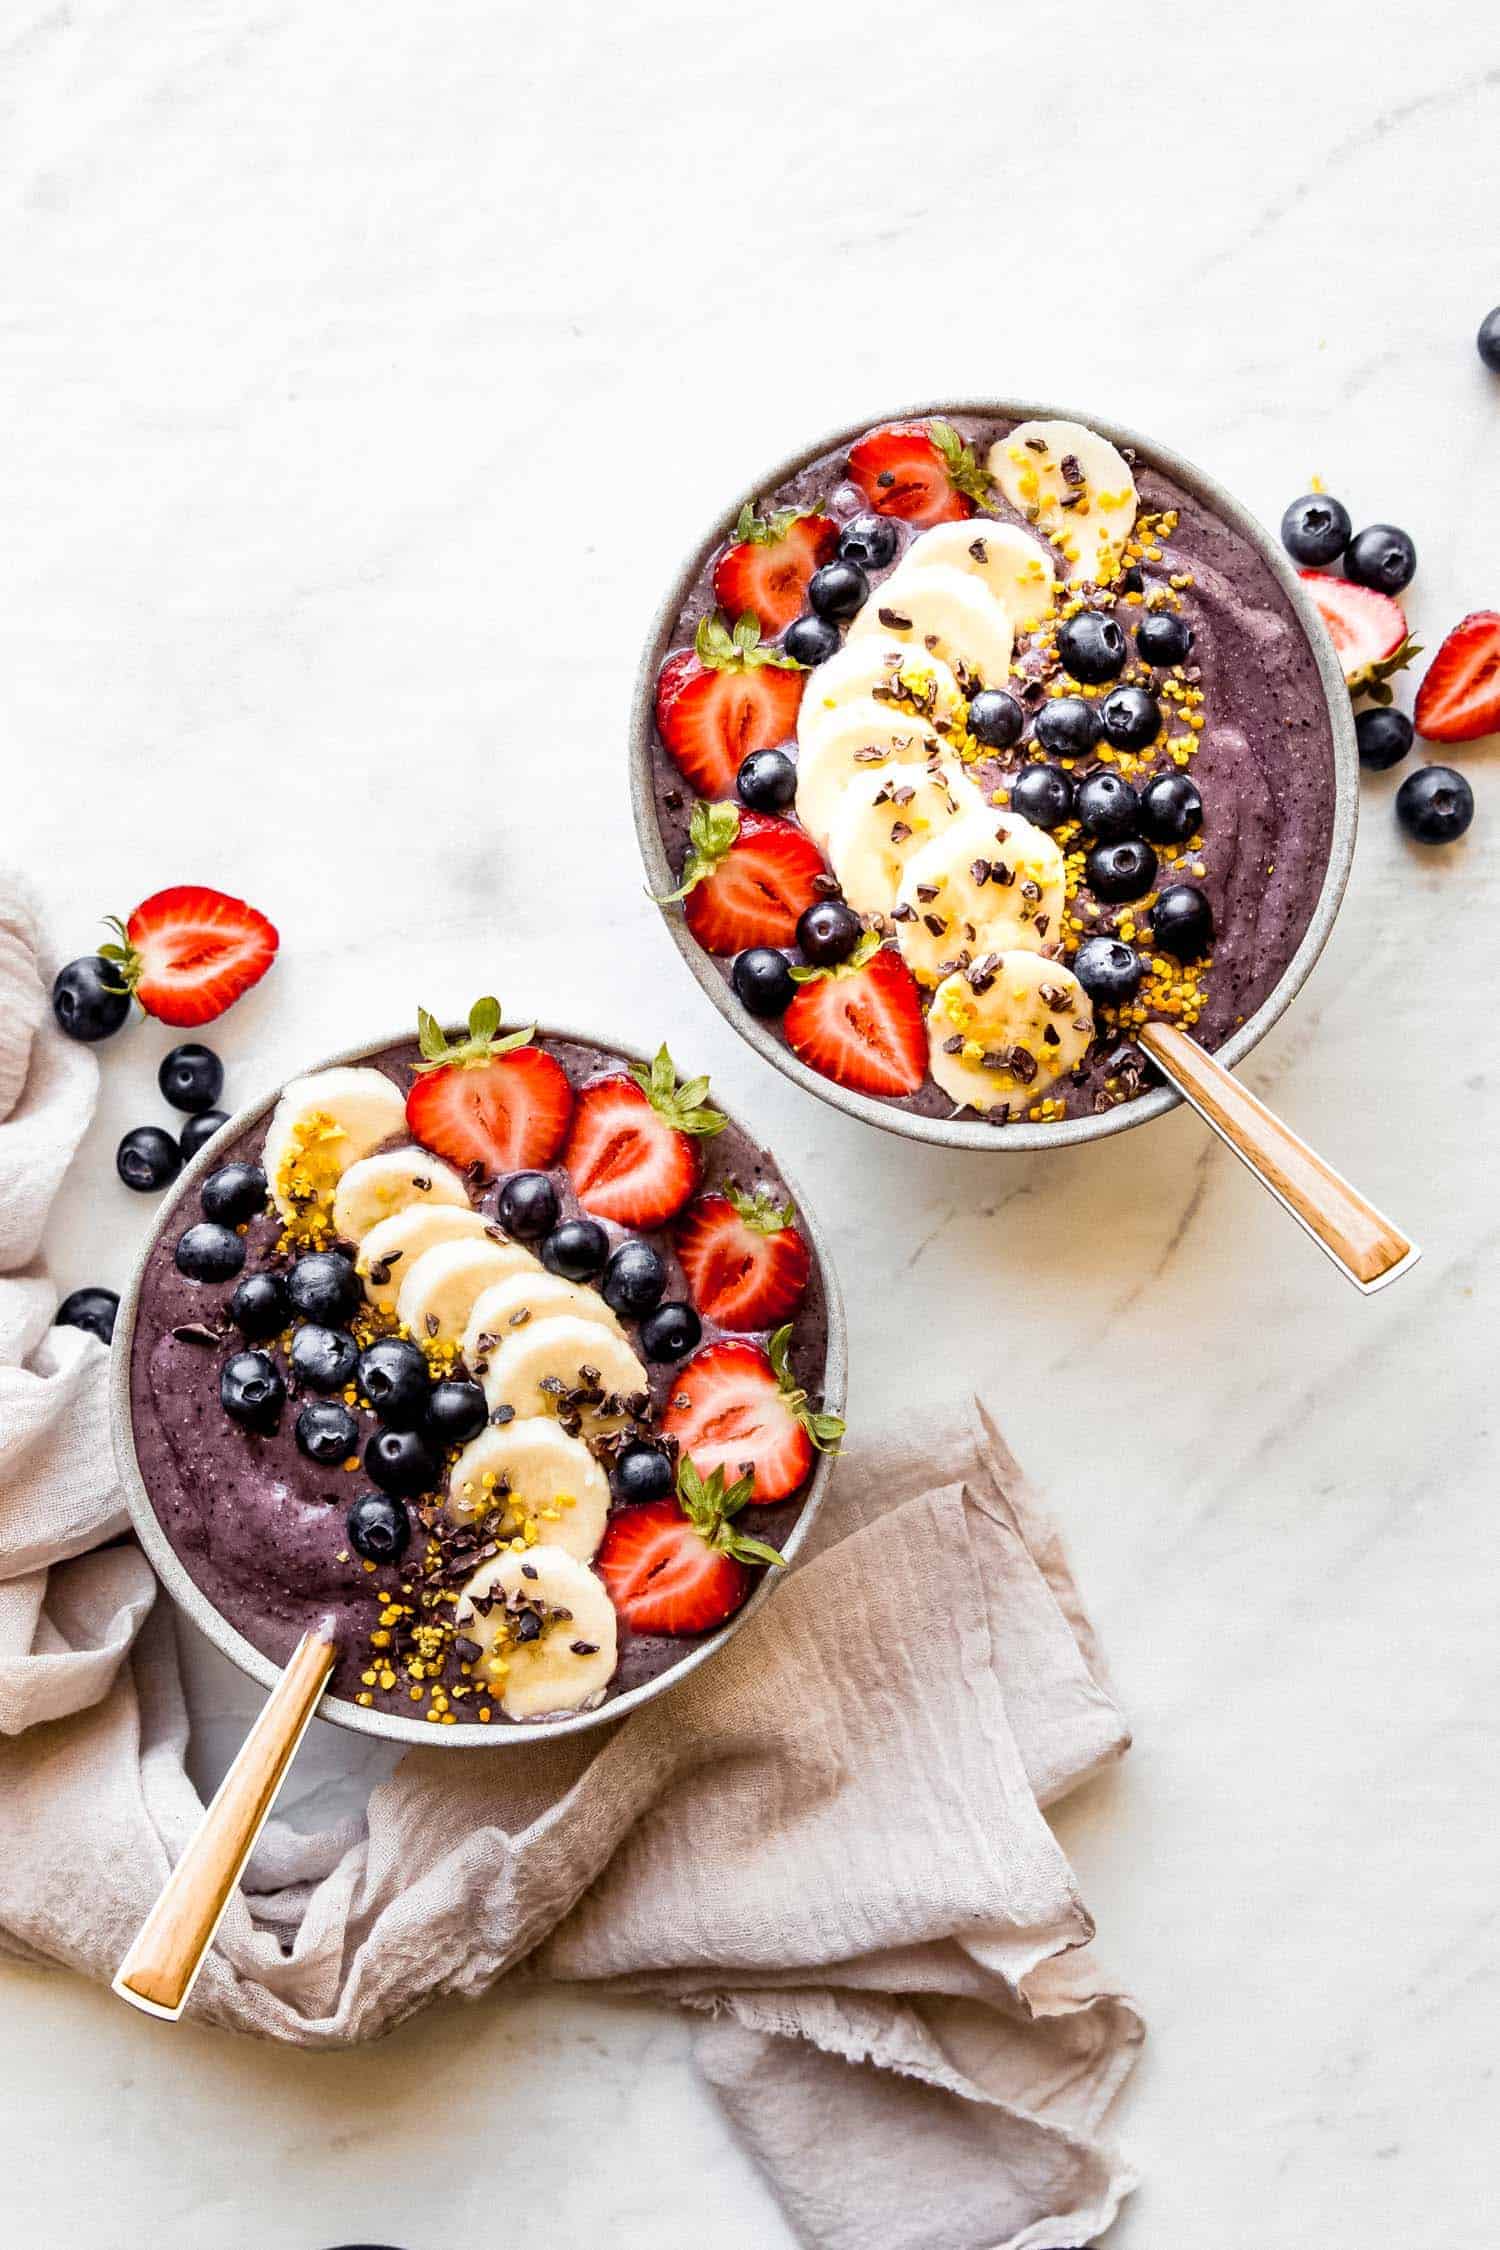 acai bowls with toppings, spoons on the side and a linen napkin